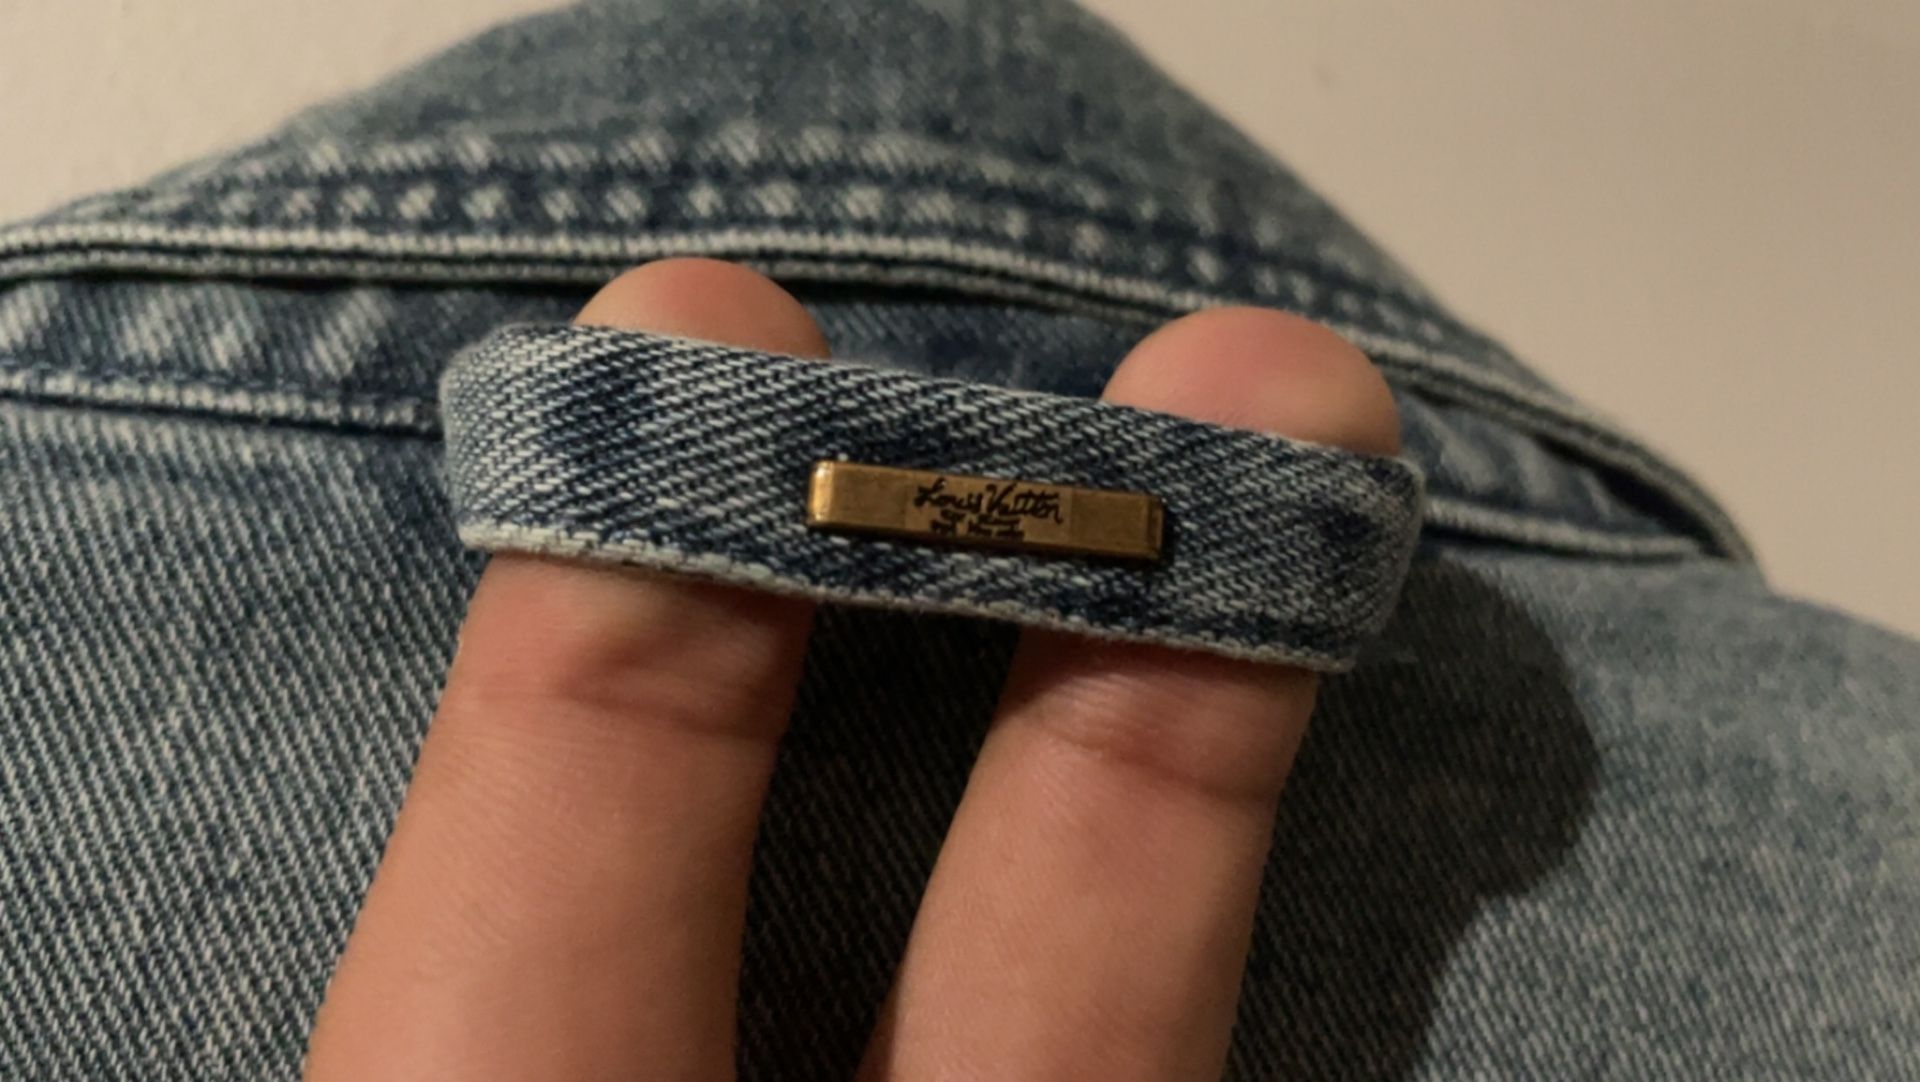 LOUIS VUITTON Monogram Denim Mom Jeans SIZE 36 european (4 US or Small) for  Sale in New York, NY - OfferUp